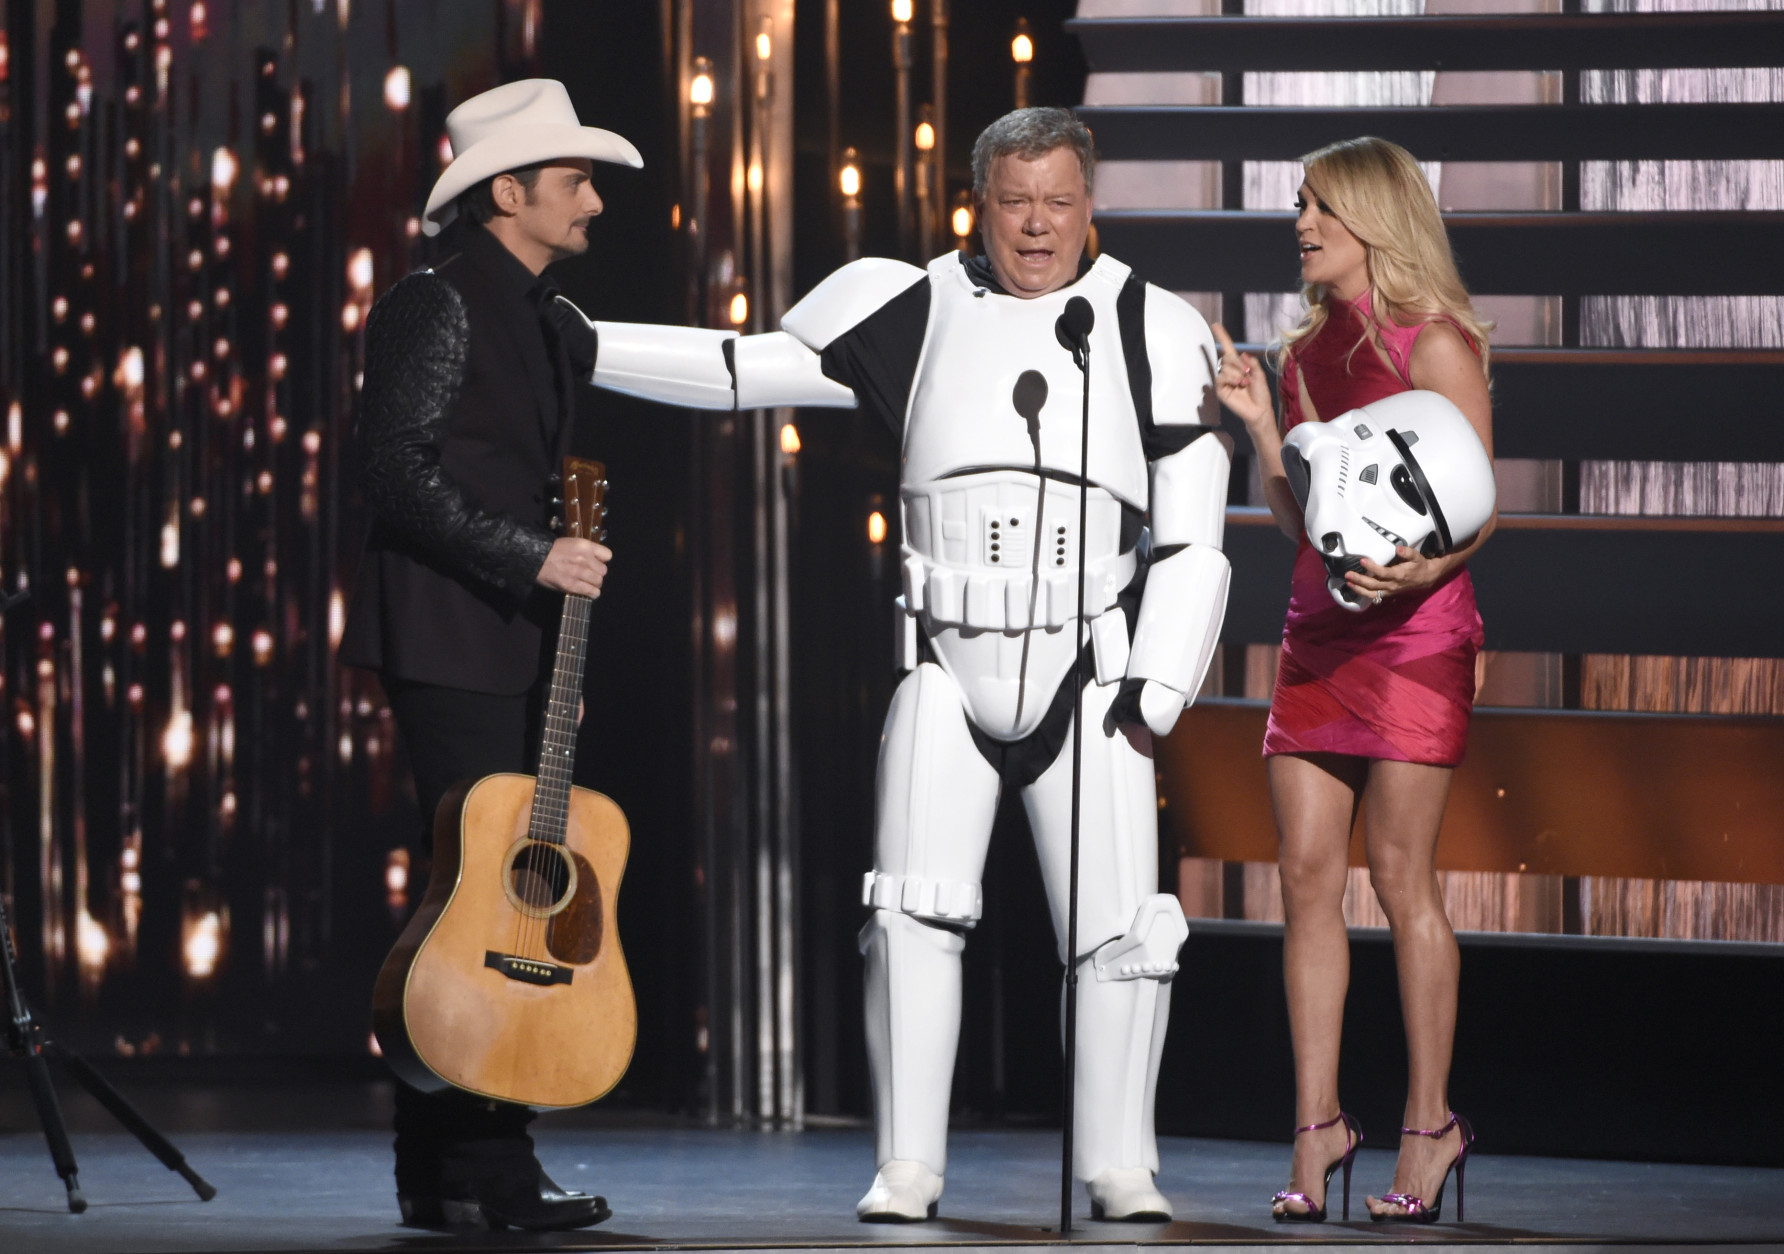 Brad Paisley, from left, William Shatner and Carrie Underwood perform a skit at the 49th annual CMA Awards at the Bridgestone Arena on Wednesday, Nov. 4, 2015, in Nashville, Tenn. (Photo by Chris Pizzello/Invision/AP)